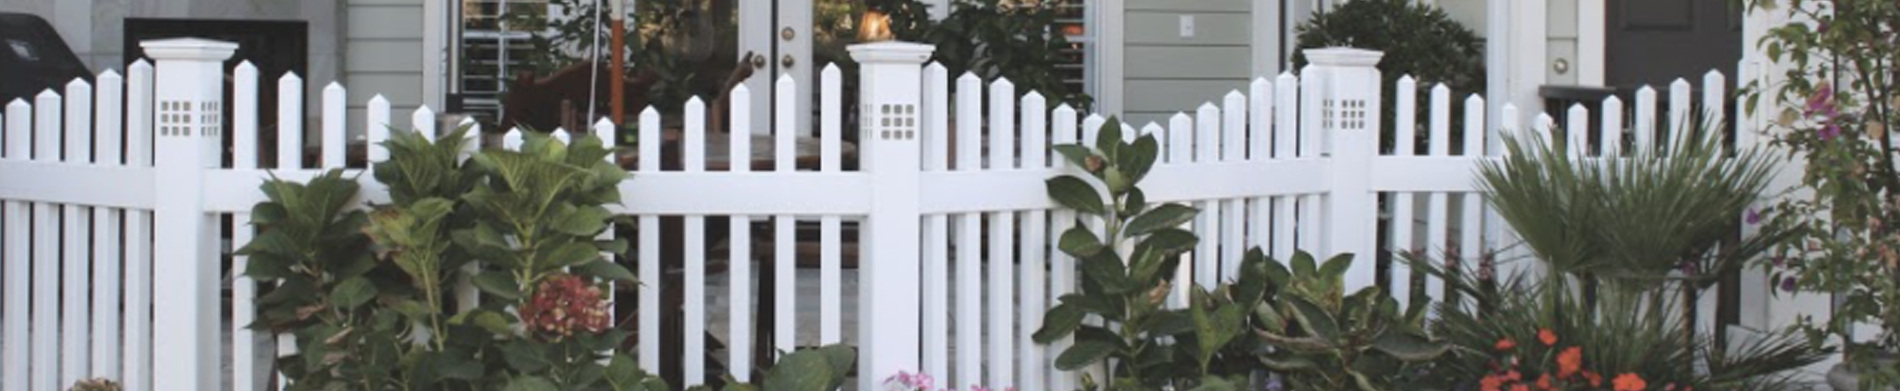 Are you looking for the best vinyl fence? – Install vinyl fences from Duramax